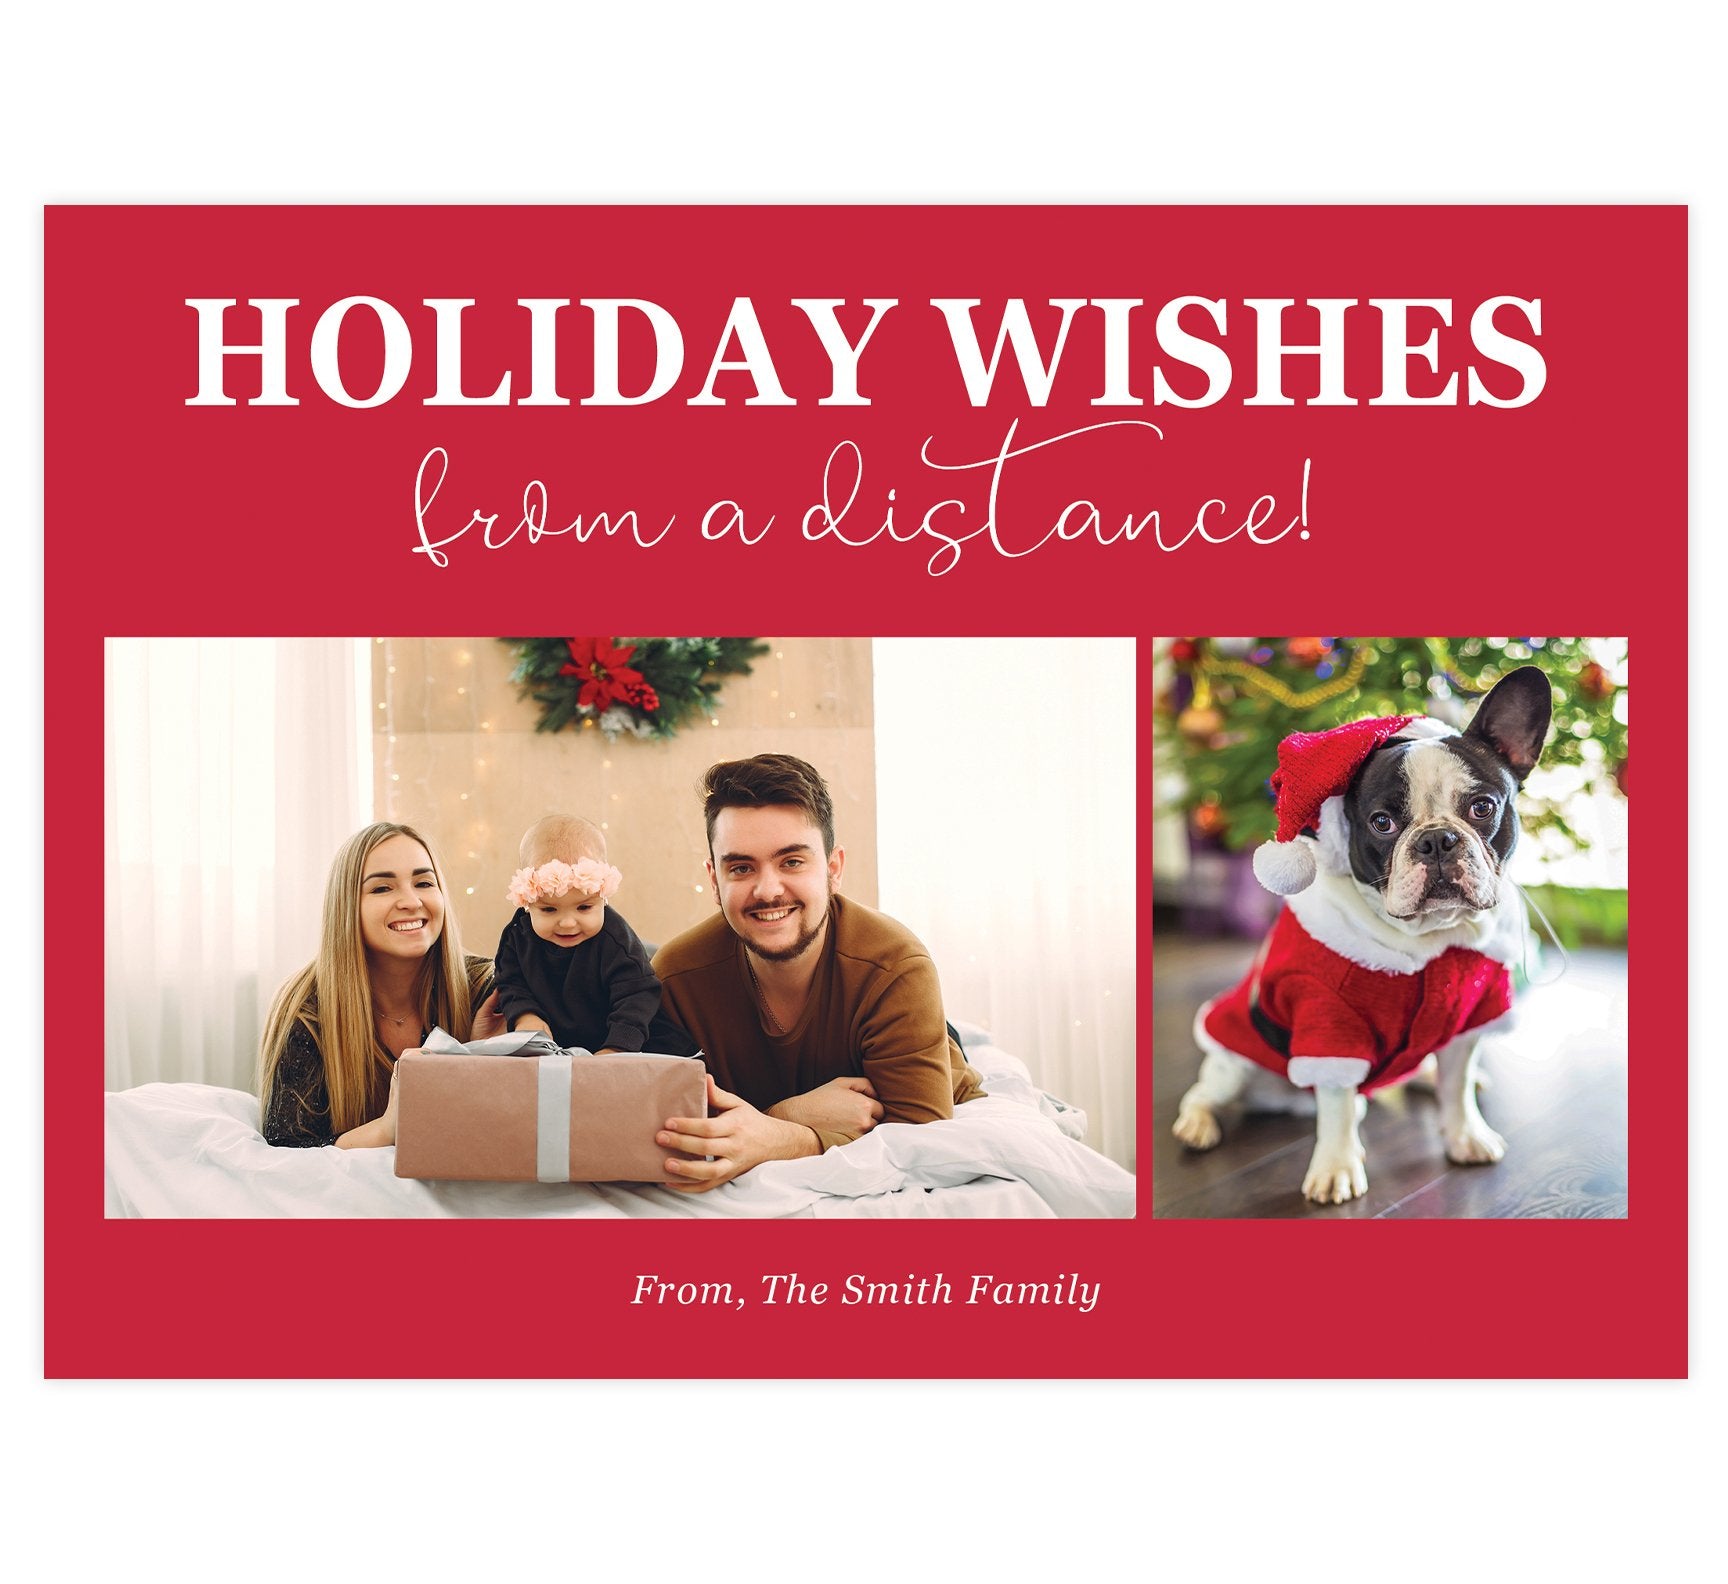 Distance Wishes Holiday Card; Red background with 2 image spots. "Holiday wishes from a distance" at the top.